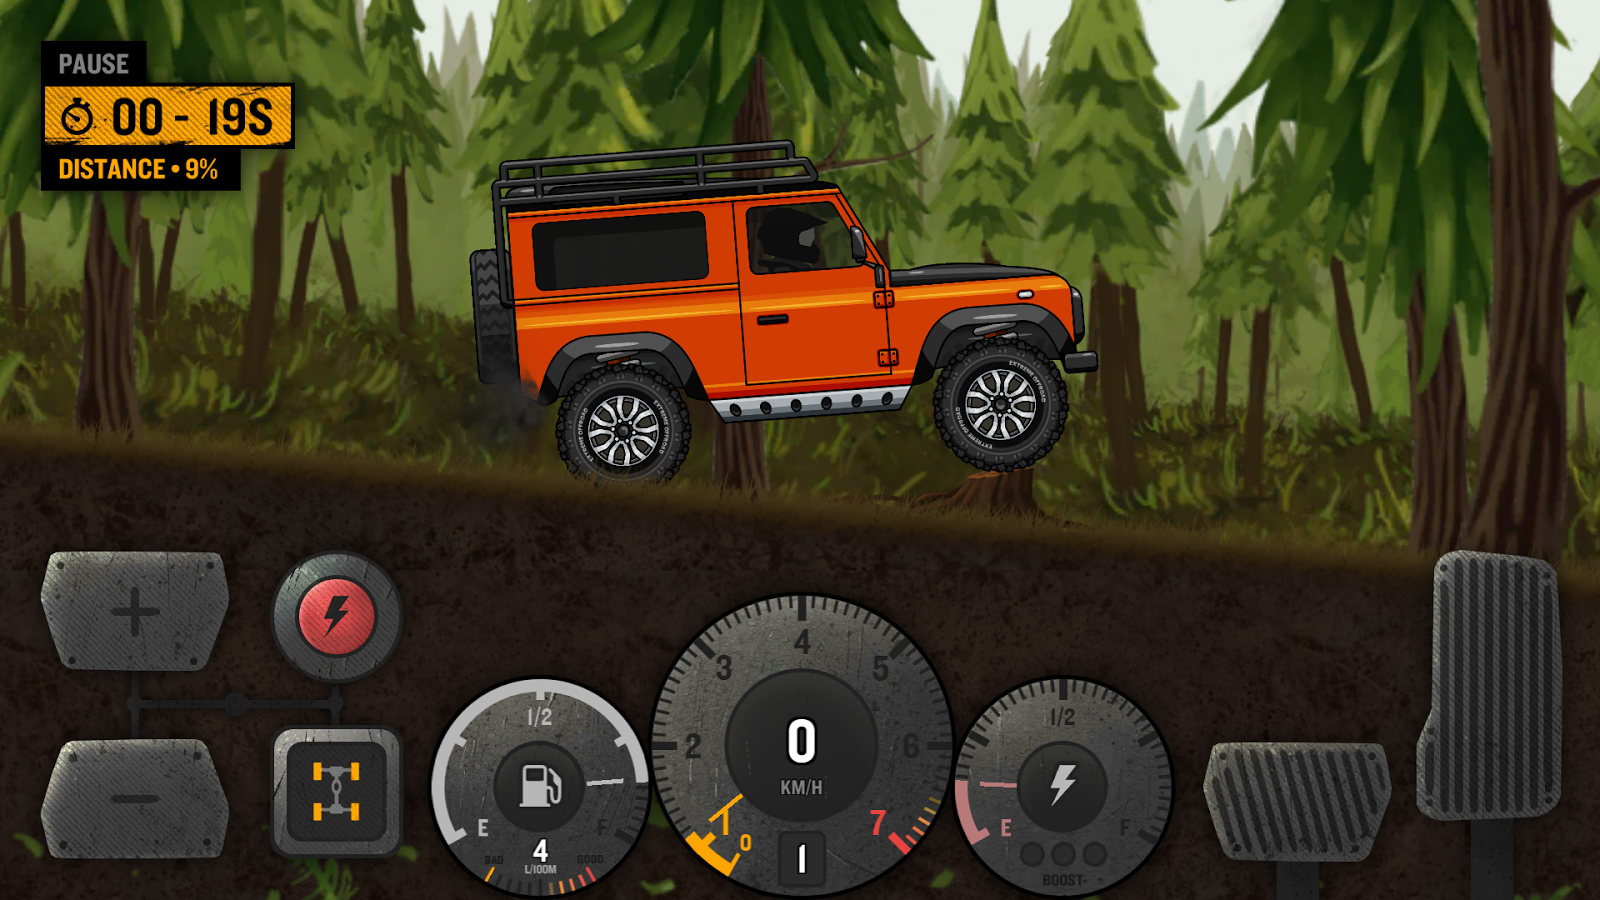 2d машины игра. Игра Rally Racing 2. Extreme Offroad Racing Rally 2. Offroad Android 4x4 игра. Off Road гонки по бездорожью.